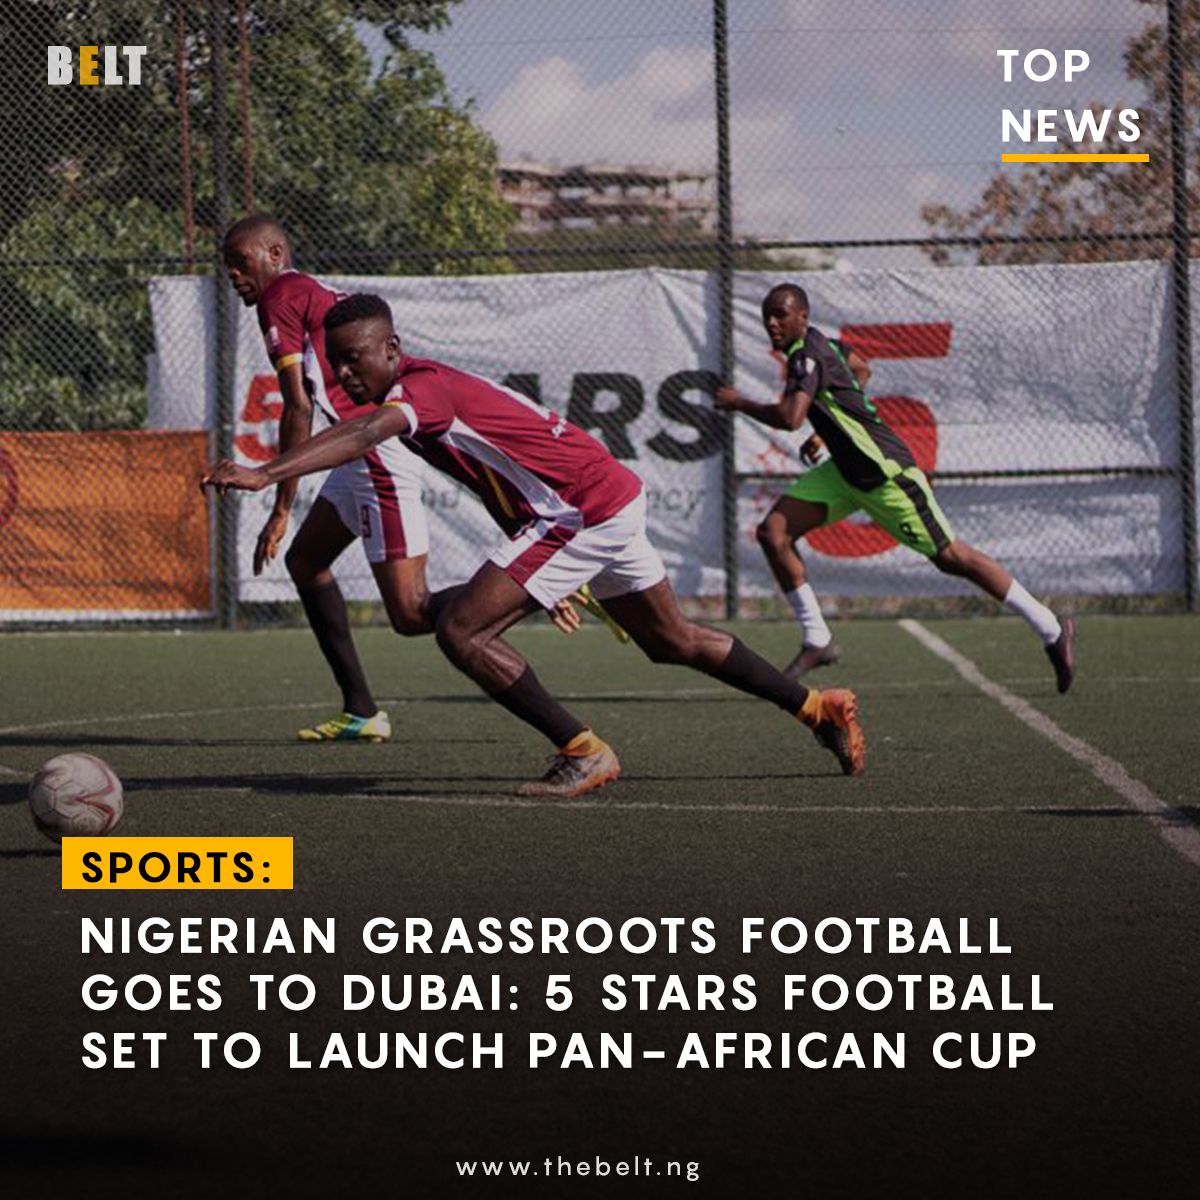 The Nigerian Sports Agency: 5 Stars Football and Consultancy announces the launch of its Pan-African Cup set to hold in Dubai.

The organization is set to take Nigerian Grassroots Football across international borders.

#BELT #BELTNews #5StarsFootball #Grassroots #Football #9ja